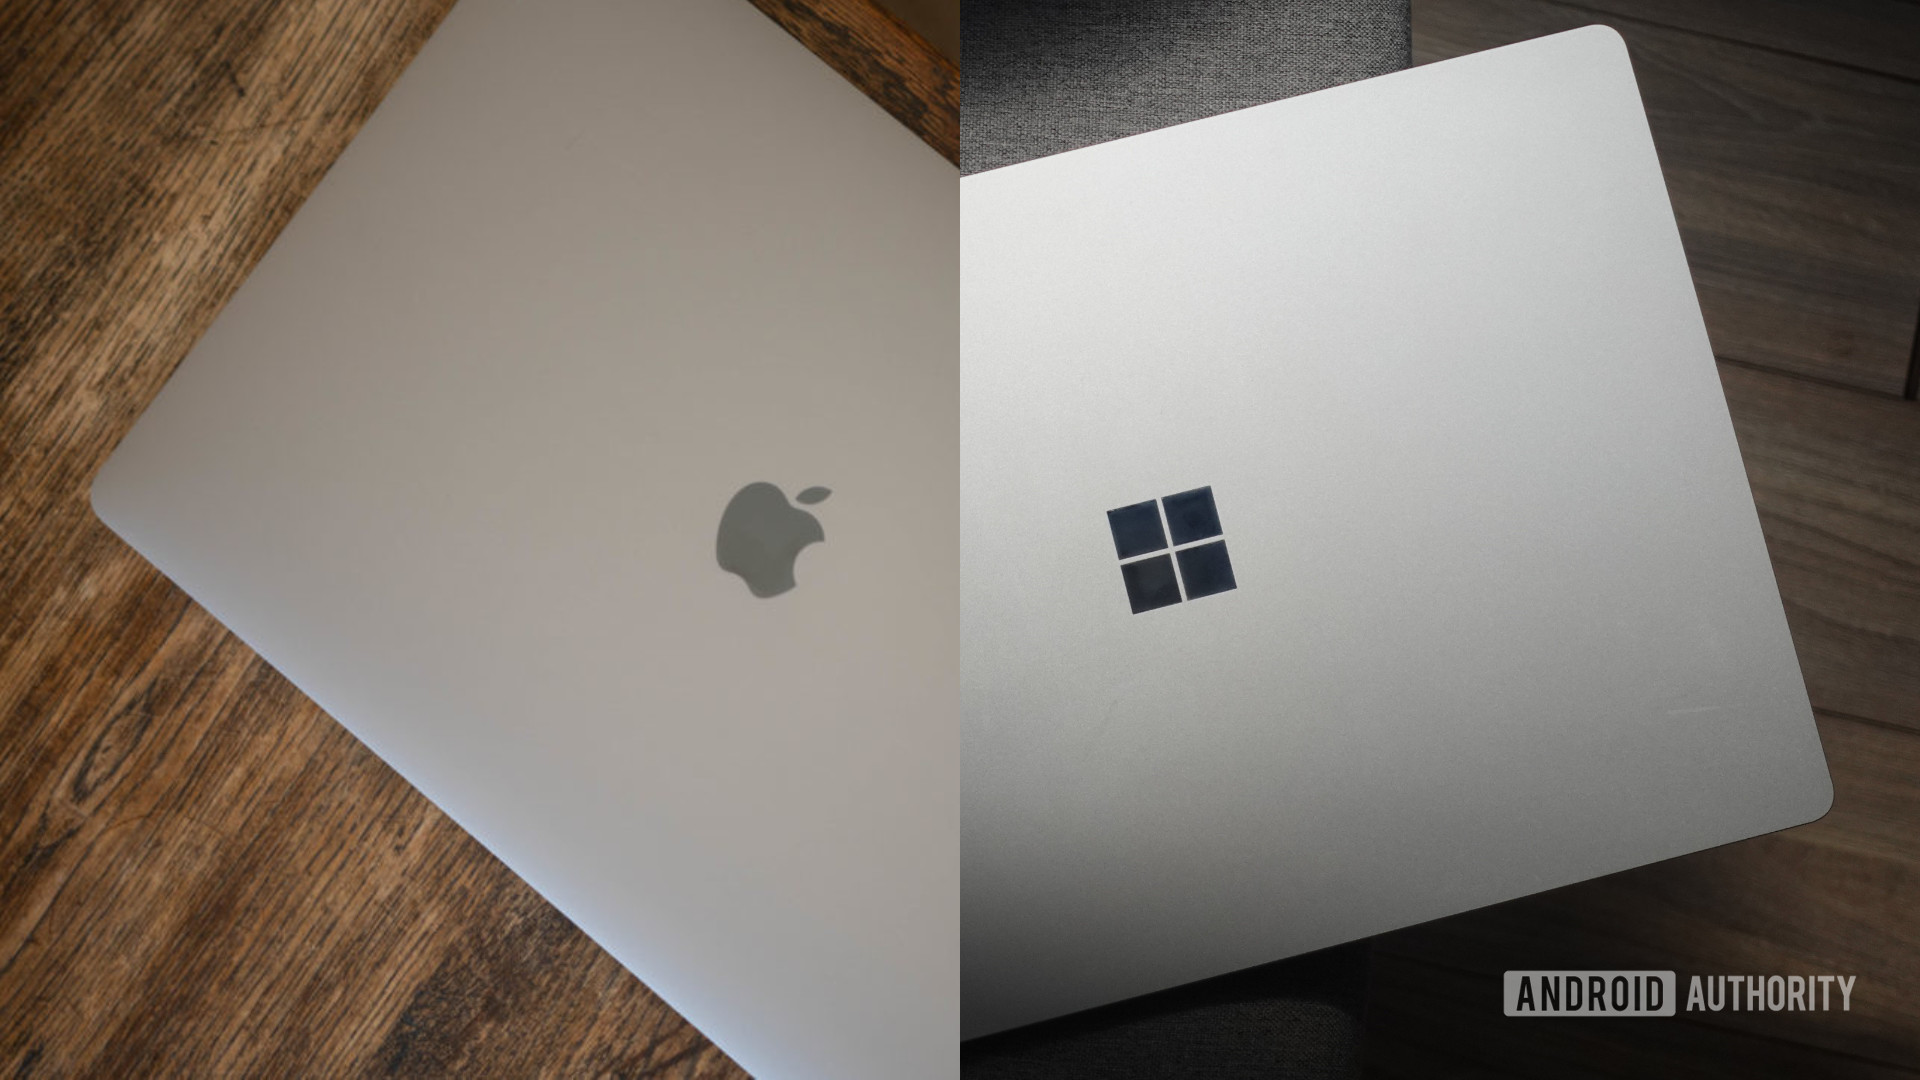 Windows vs macOS: How to choose? Is one better than the other?